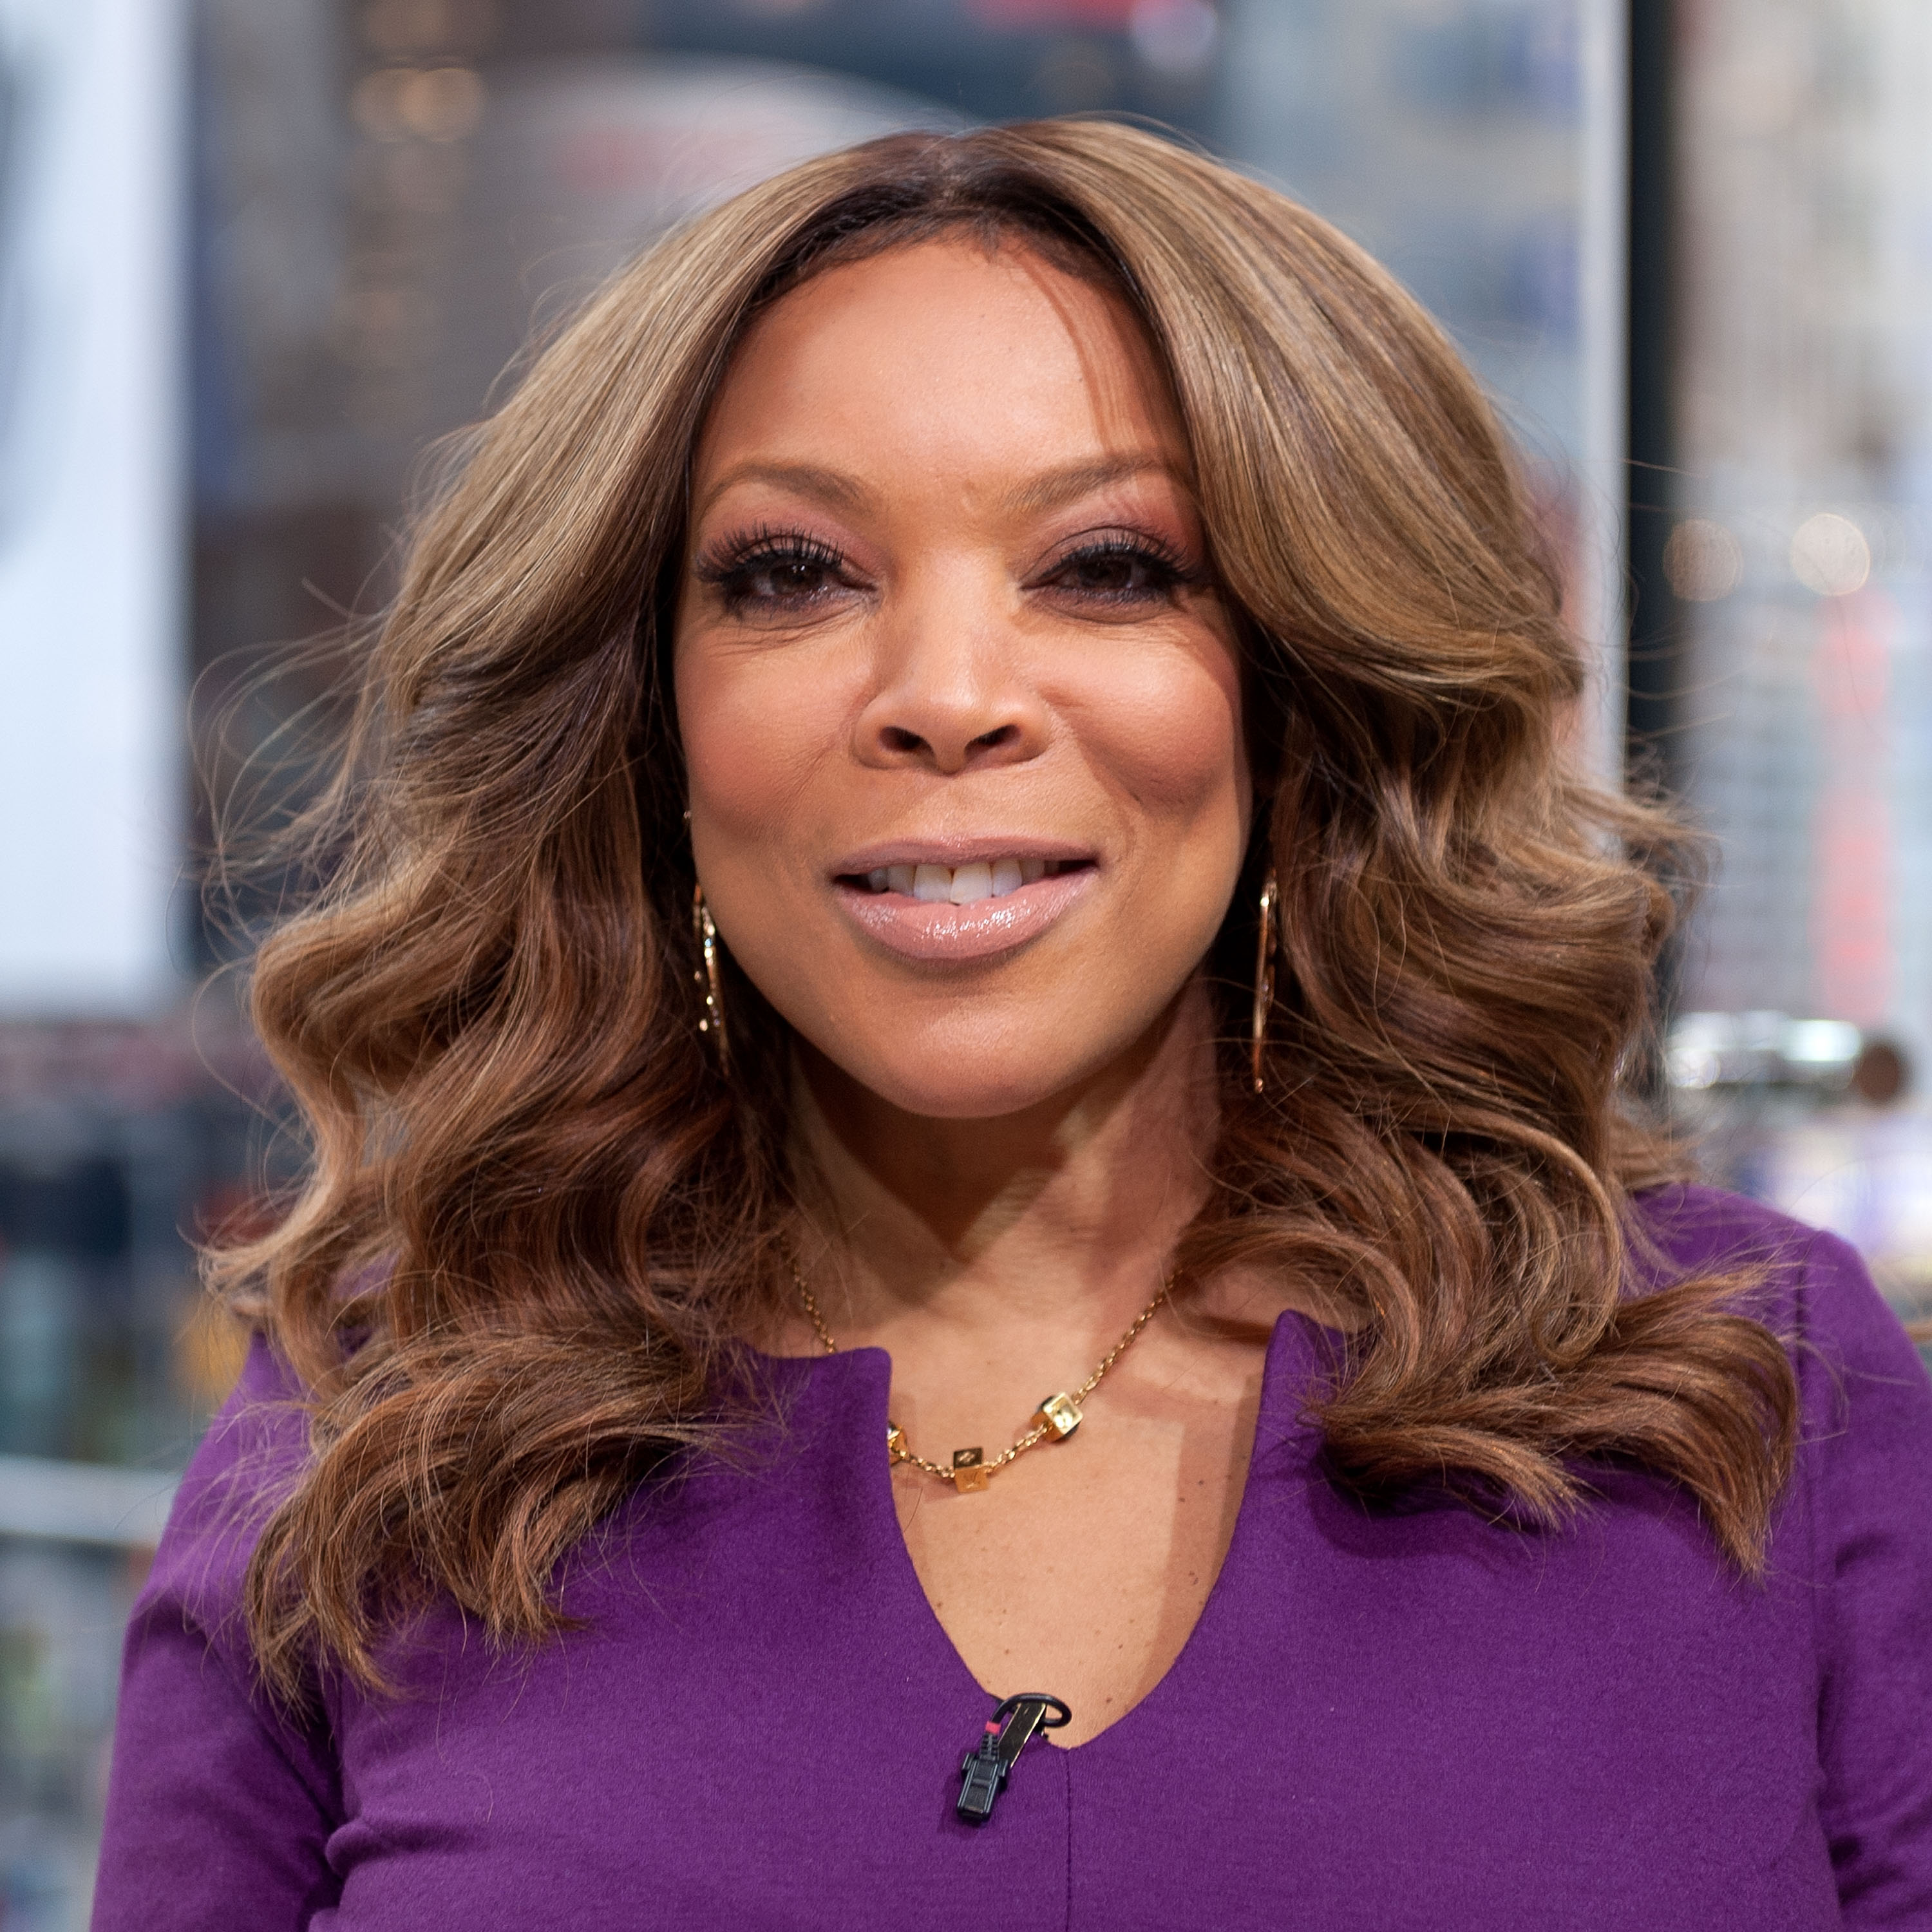 Wendy Williams visits "Extra" on January 21, 2015 in New York City | Photo: Getty Images